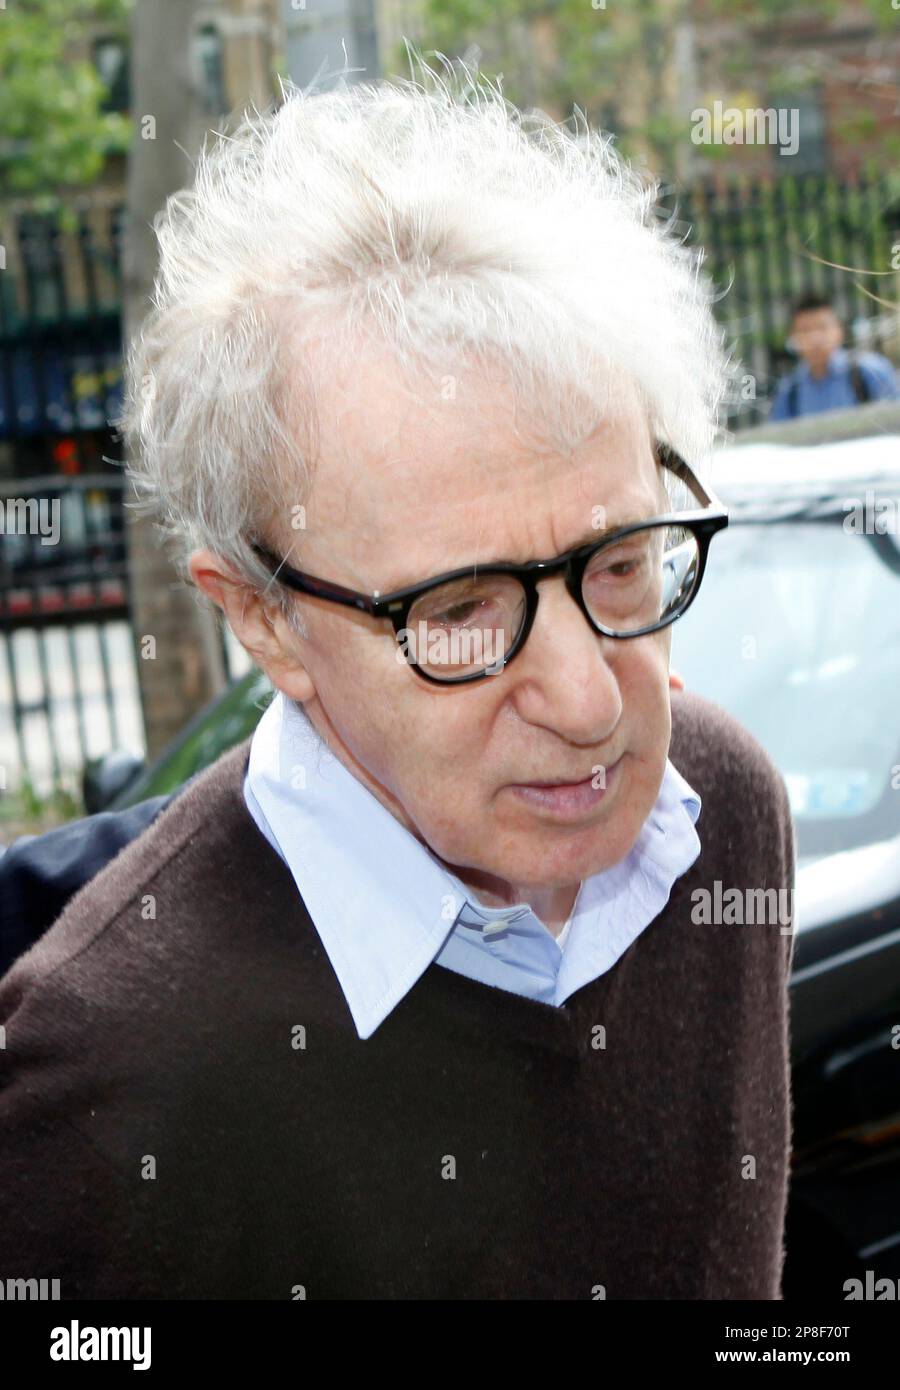 Actor-director Woody Allen arrives to the federal courthouse in New York, Monday, May 18, 2009. Allen sued American Apparel Inc. in 2008 for $10 million, claiming it didn't have permission to use a doctored frame of him from the Oscar-winning film "Annie Hall" on the billboards and on a Web site. (AP Photo/Seth Wenig) Foto de stock